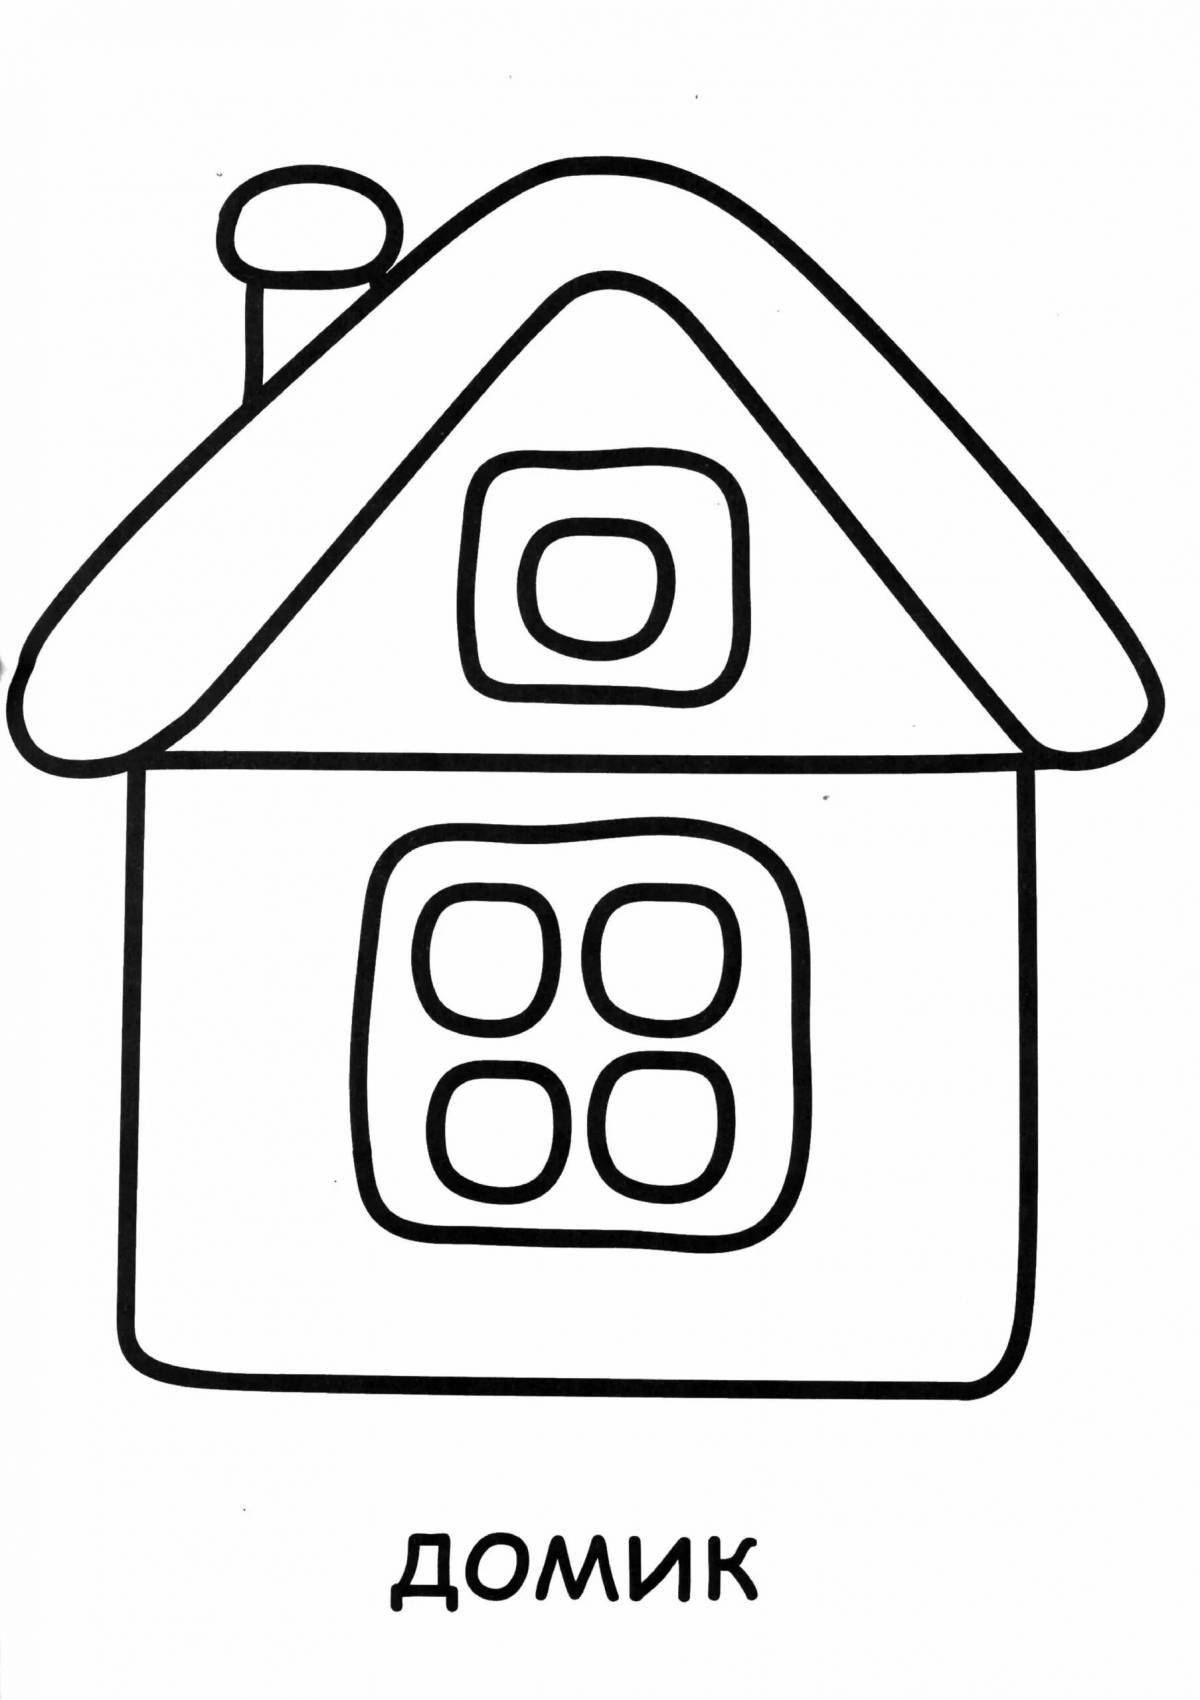 Amazing house coloring pages for 4-5 year olds